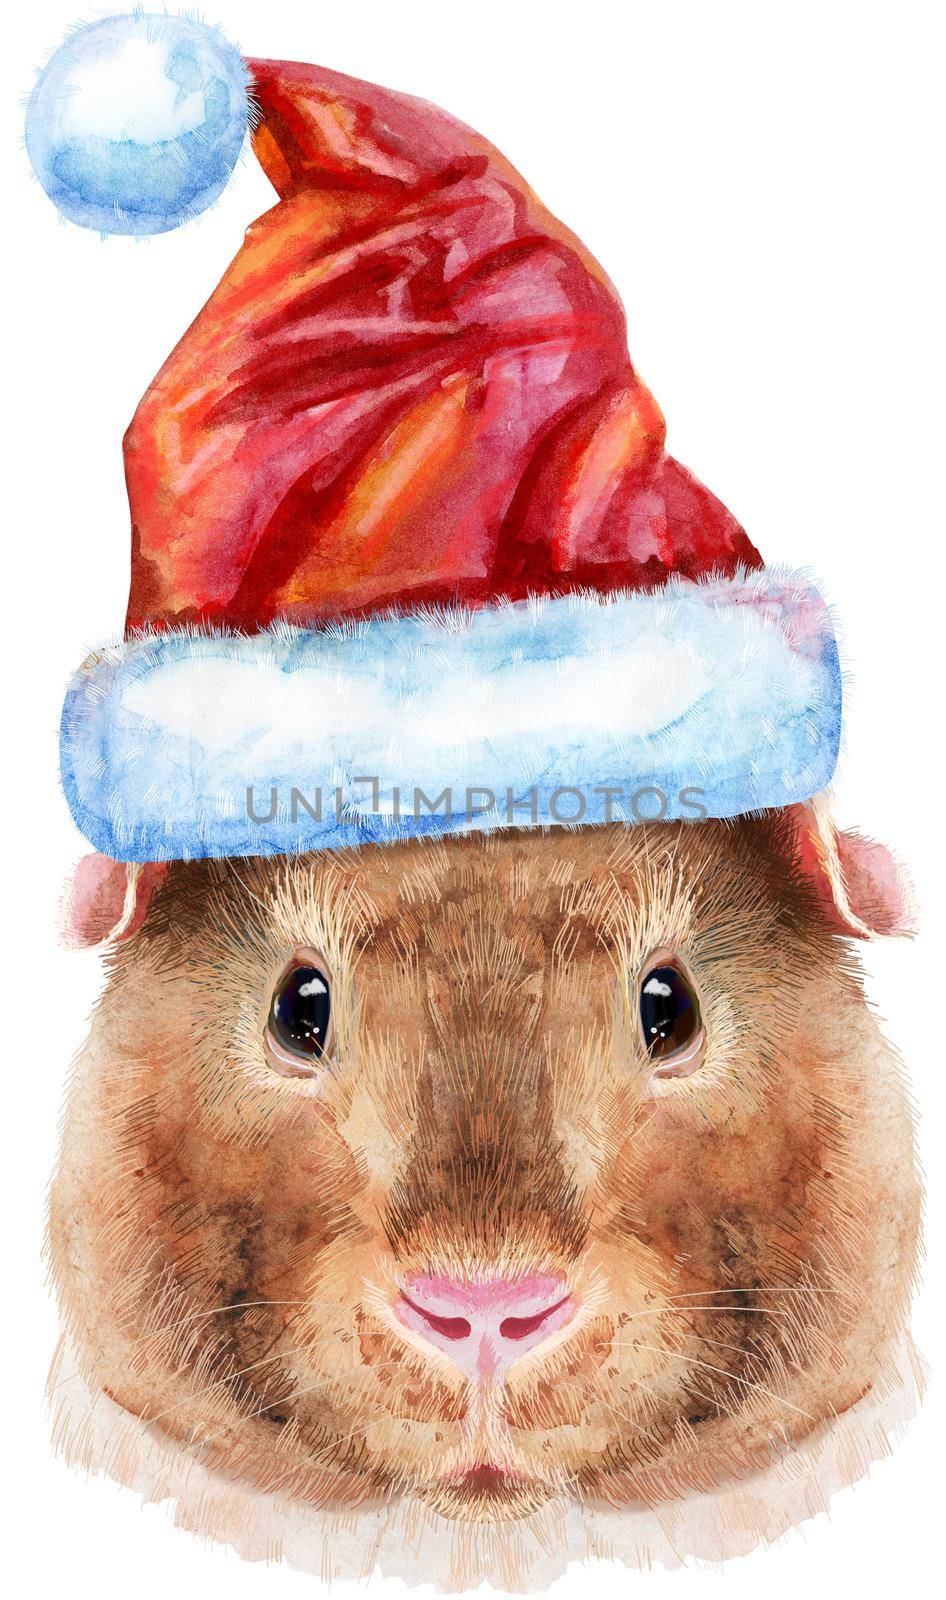 Watercolor portrait of Teddy guinea pig with Santa hat on white background by NataOmsk